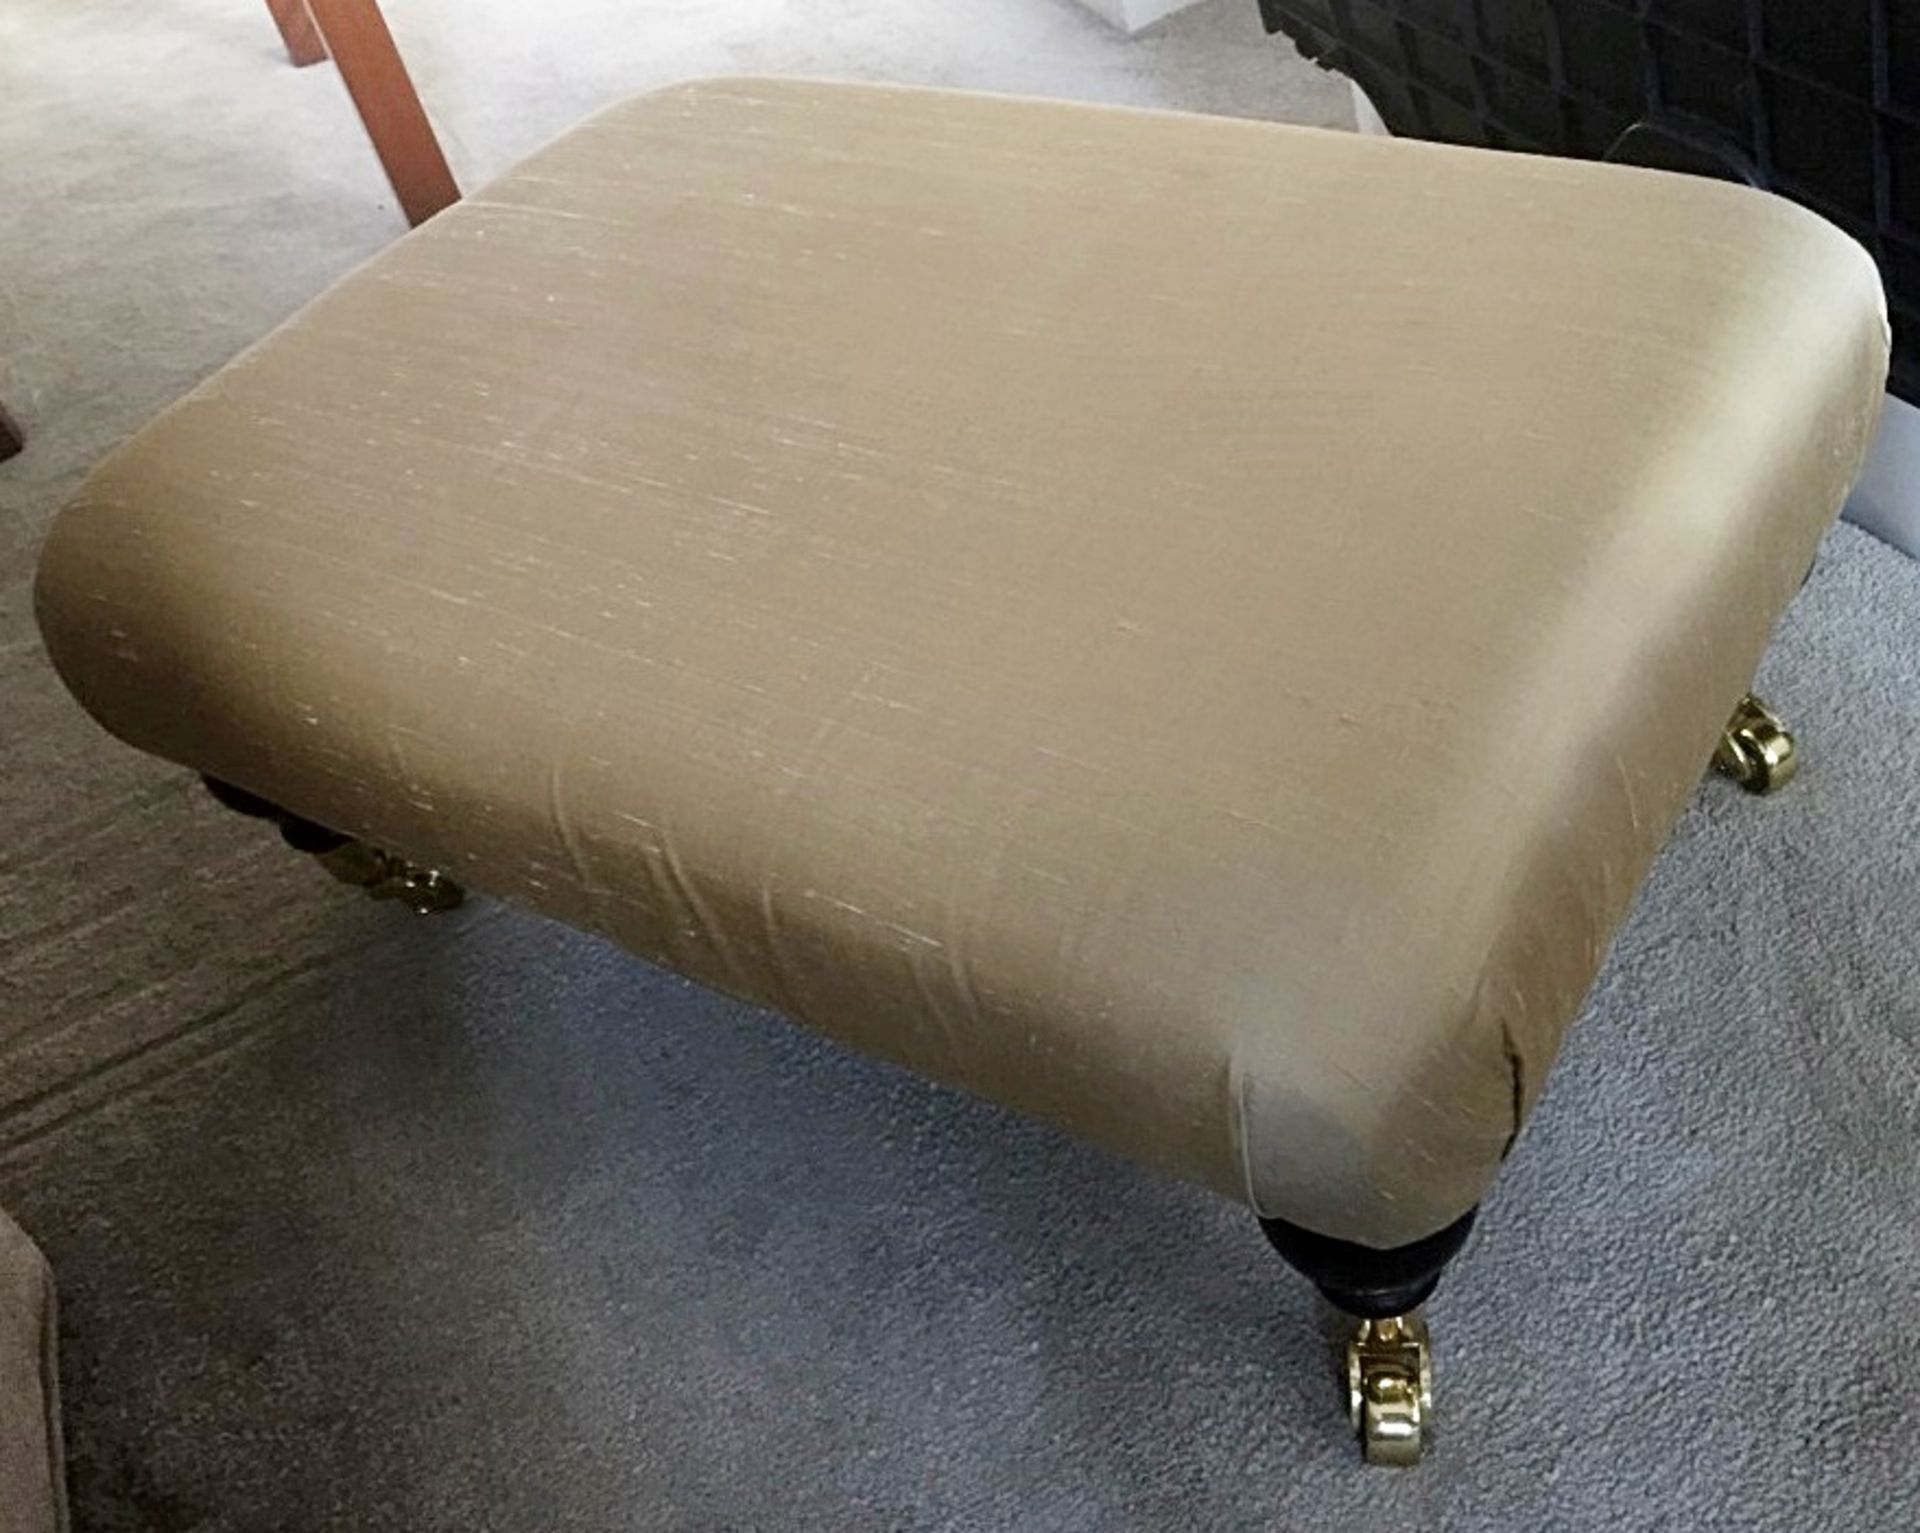 1 x Small Upholstered Footstool - Covered In A Champagne-Coloured Silky Fabric - Dimensions: 62cm